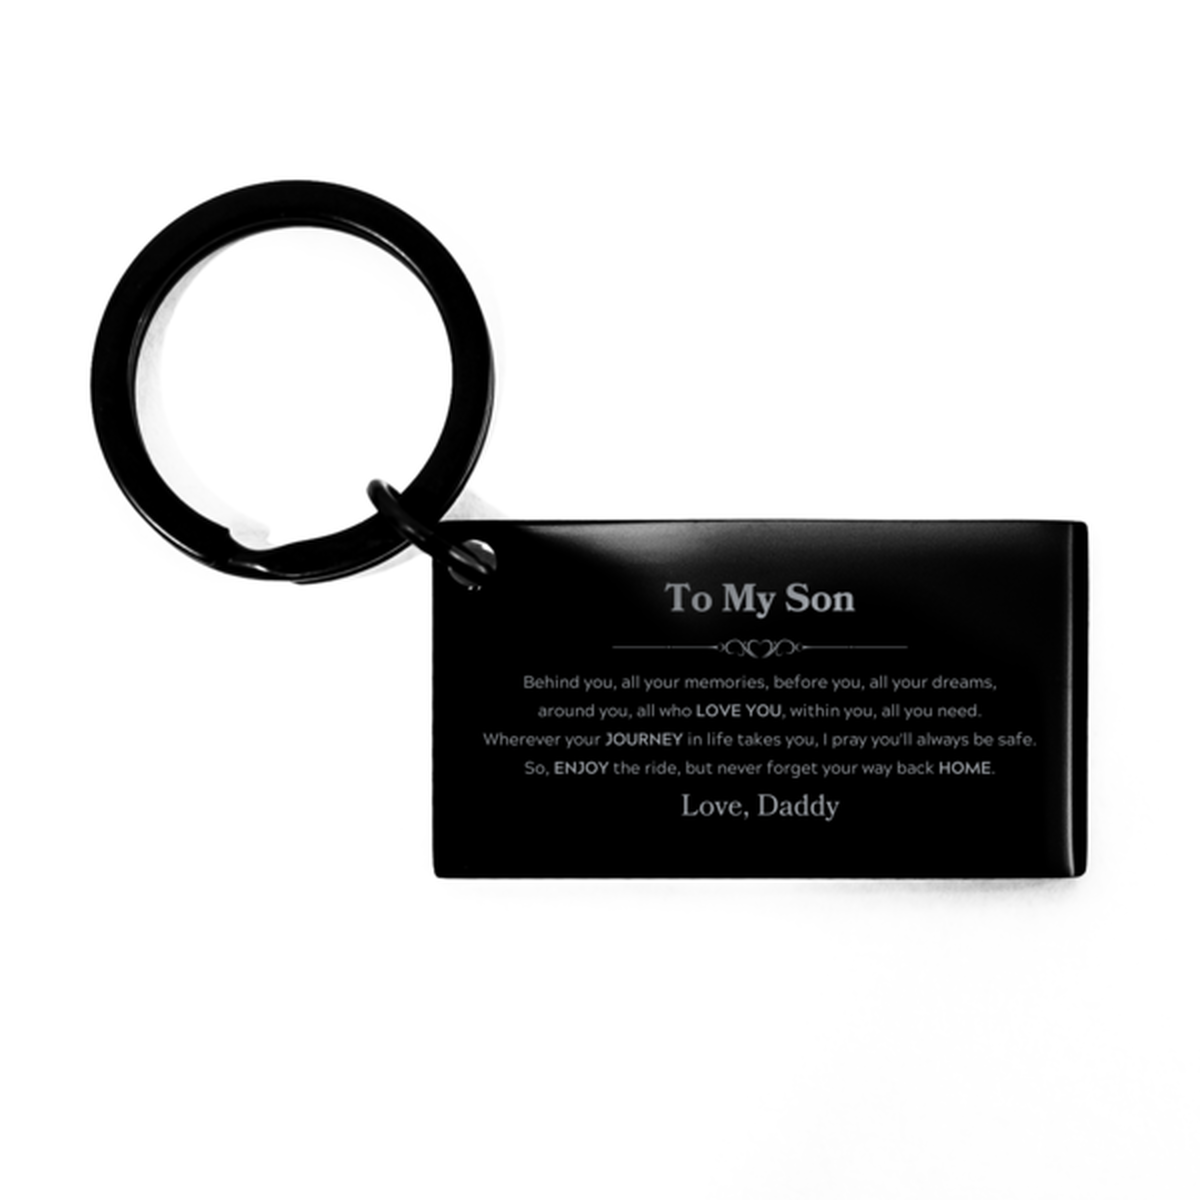 To My Son Graduation Gifts from Daddy, Son Keychain Christmas Birthday Gifts for Son Behind you, all your memories, before you, all your dreams. Love, Daddy